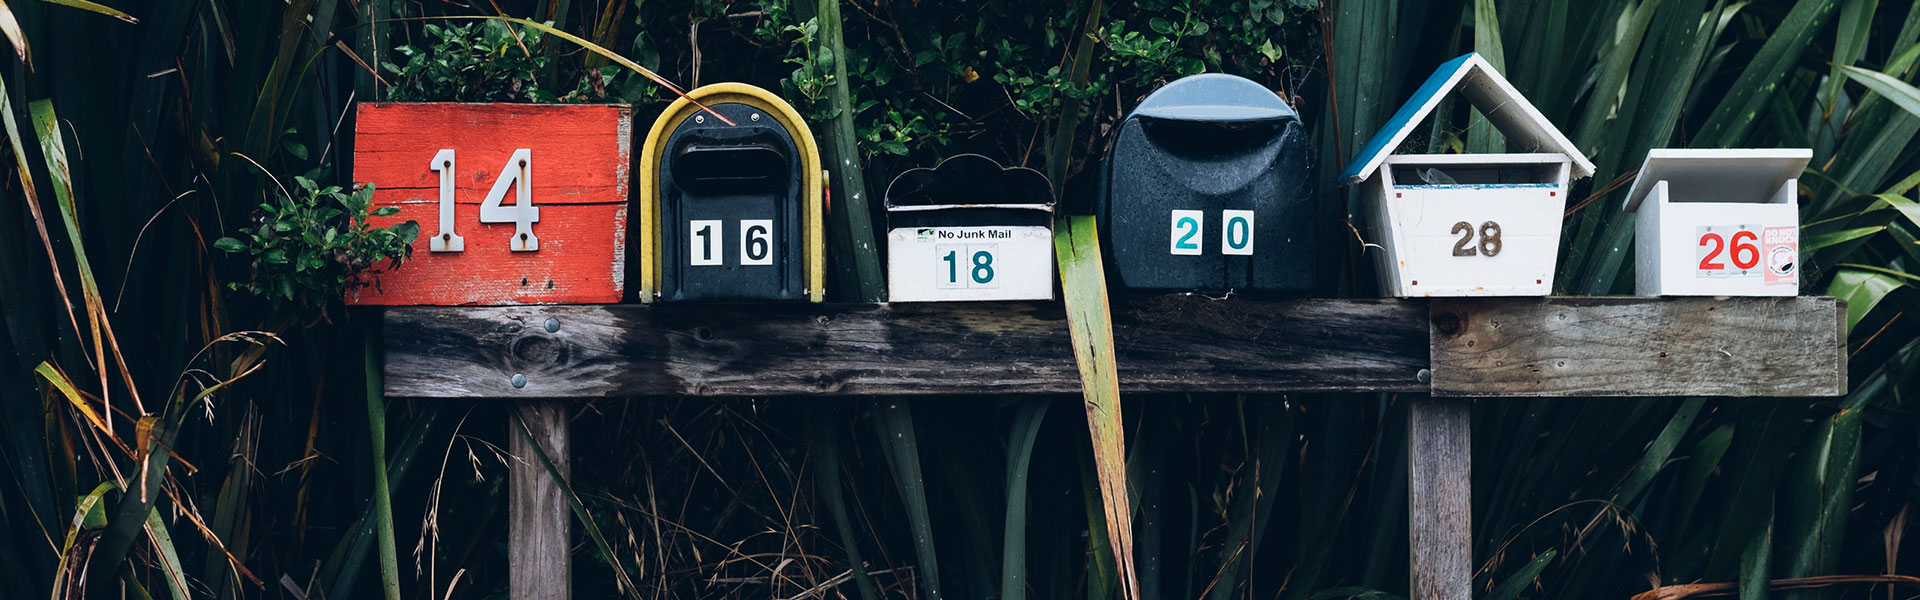 Me mailboxes near Mailboxes at